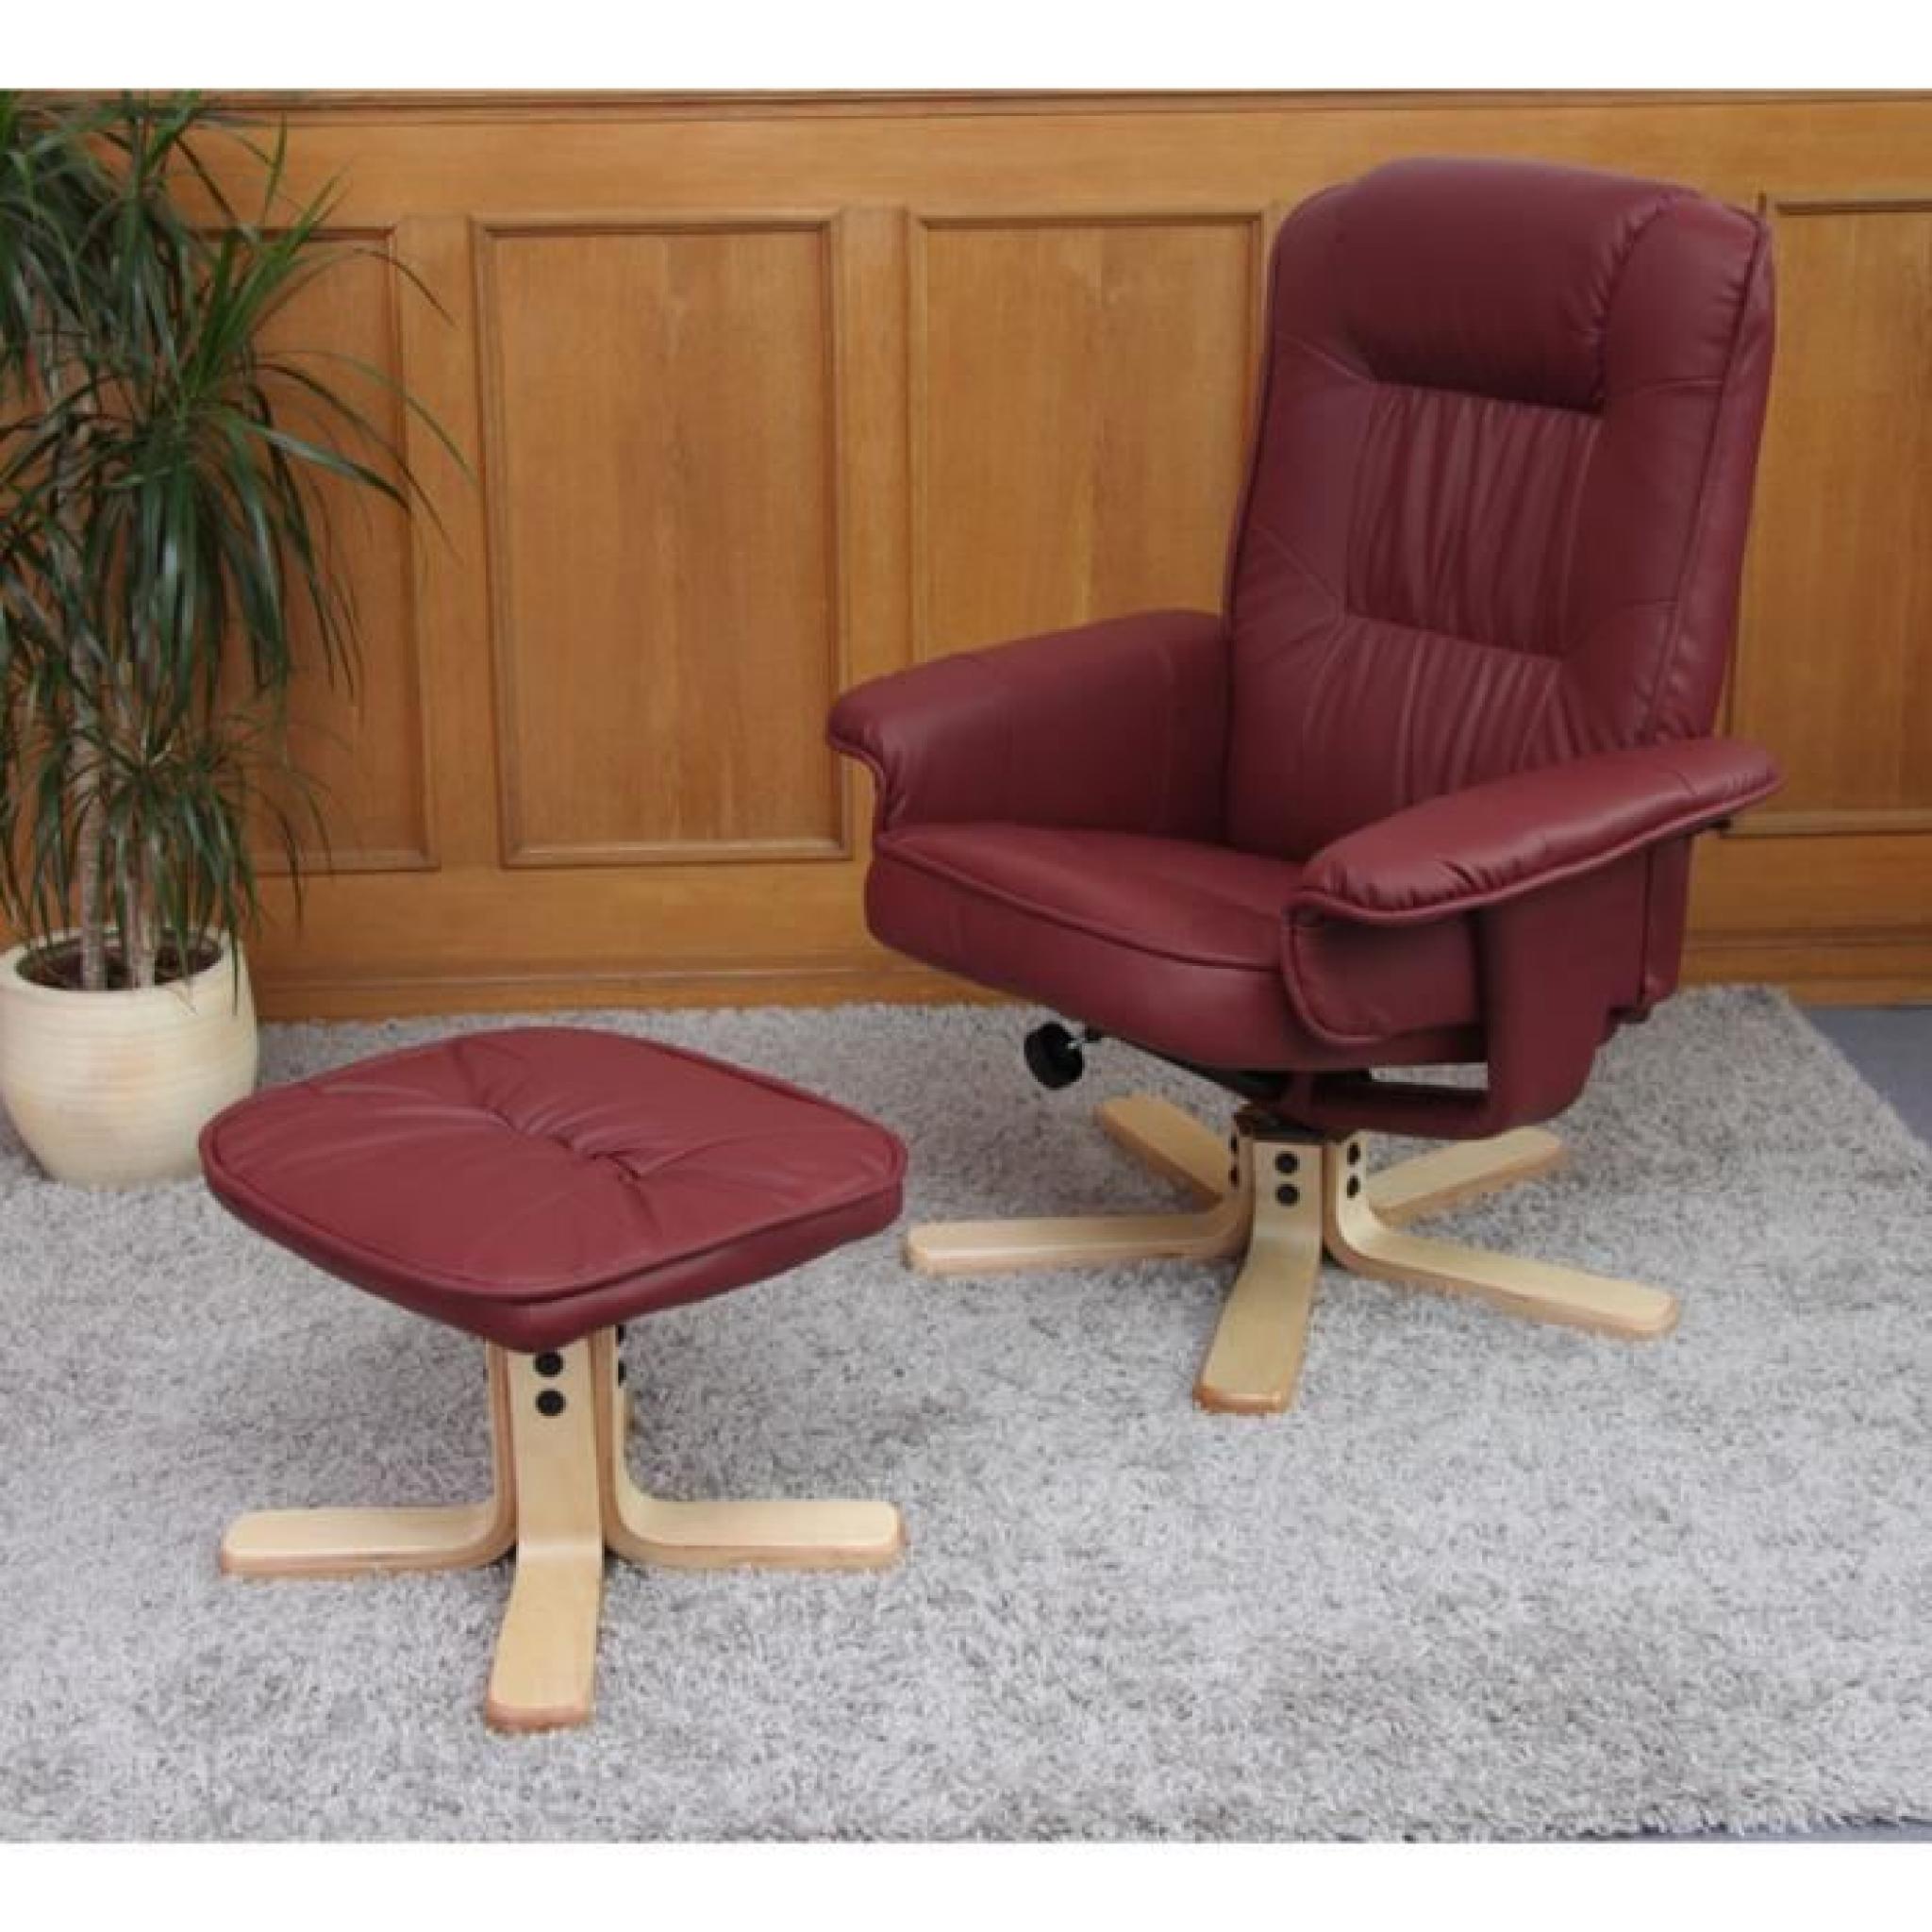 Chaise fauteuil inclinable + repos pied bordeaux